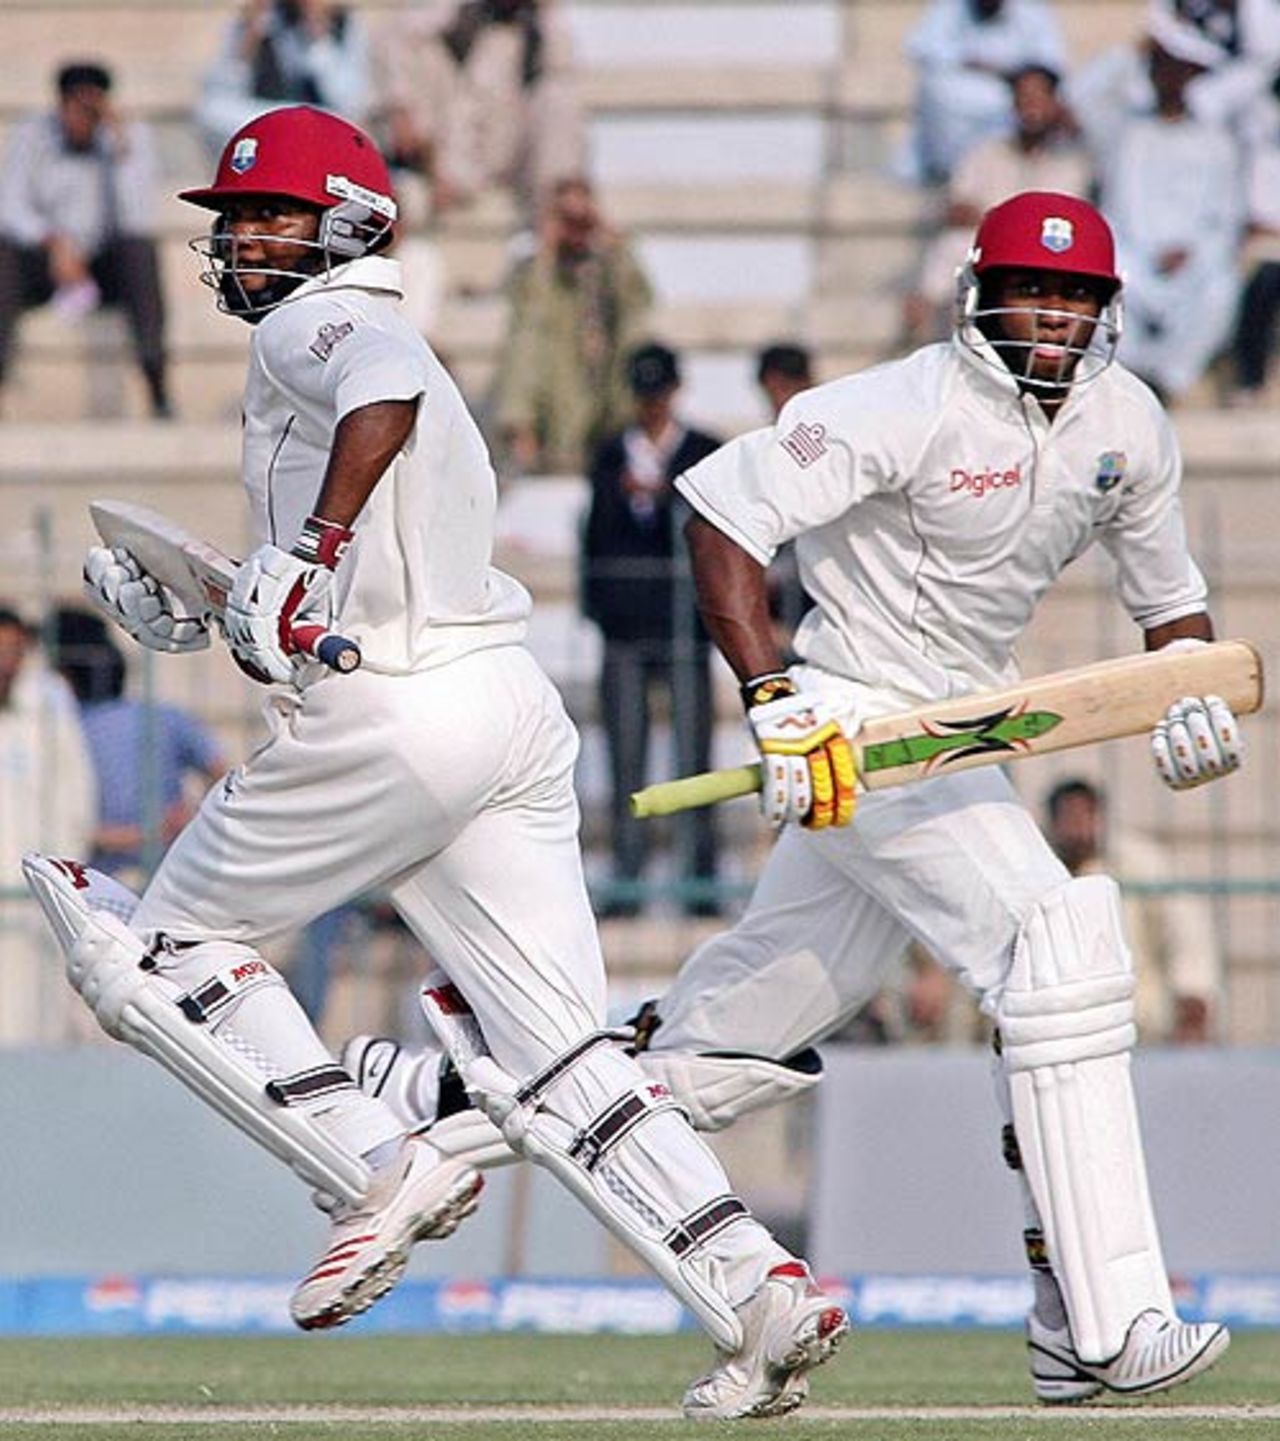 Brian Lara and Dwayne Bravo enroute to a double-century partnership for the fifth wicket, Pakistan v West Indies, 2nd Test, Multan, November 21, 2006